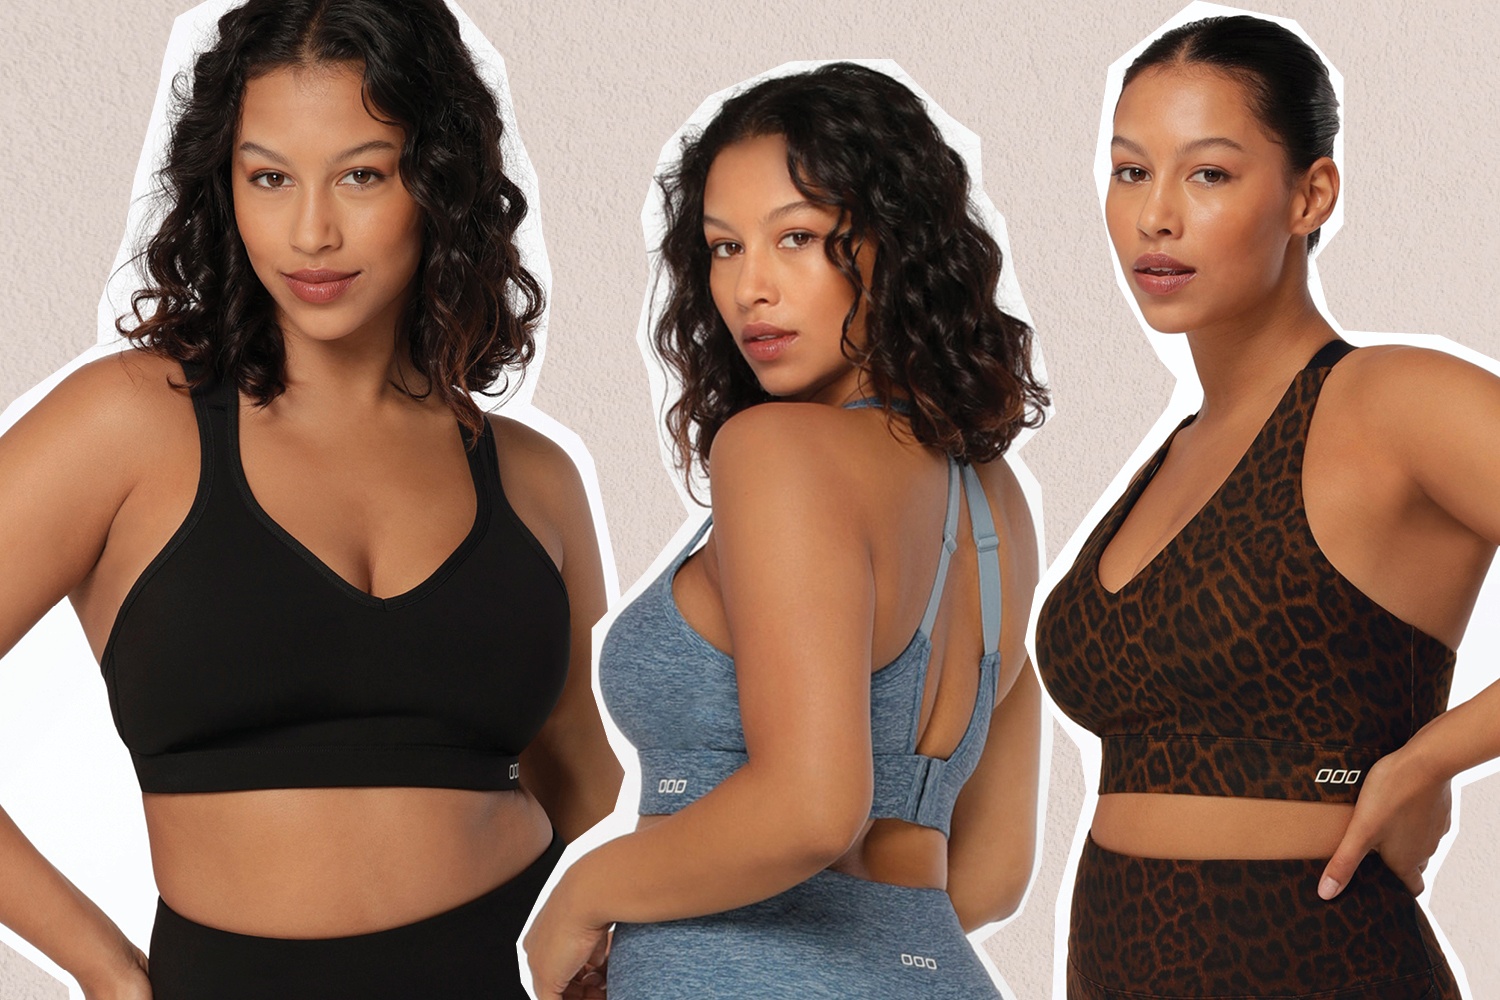 Chubby Girls With Tiny Tits - The Best Sports Bras For Large Breasts | Lorna Jane